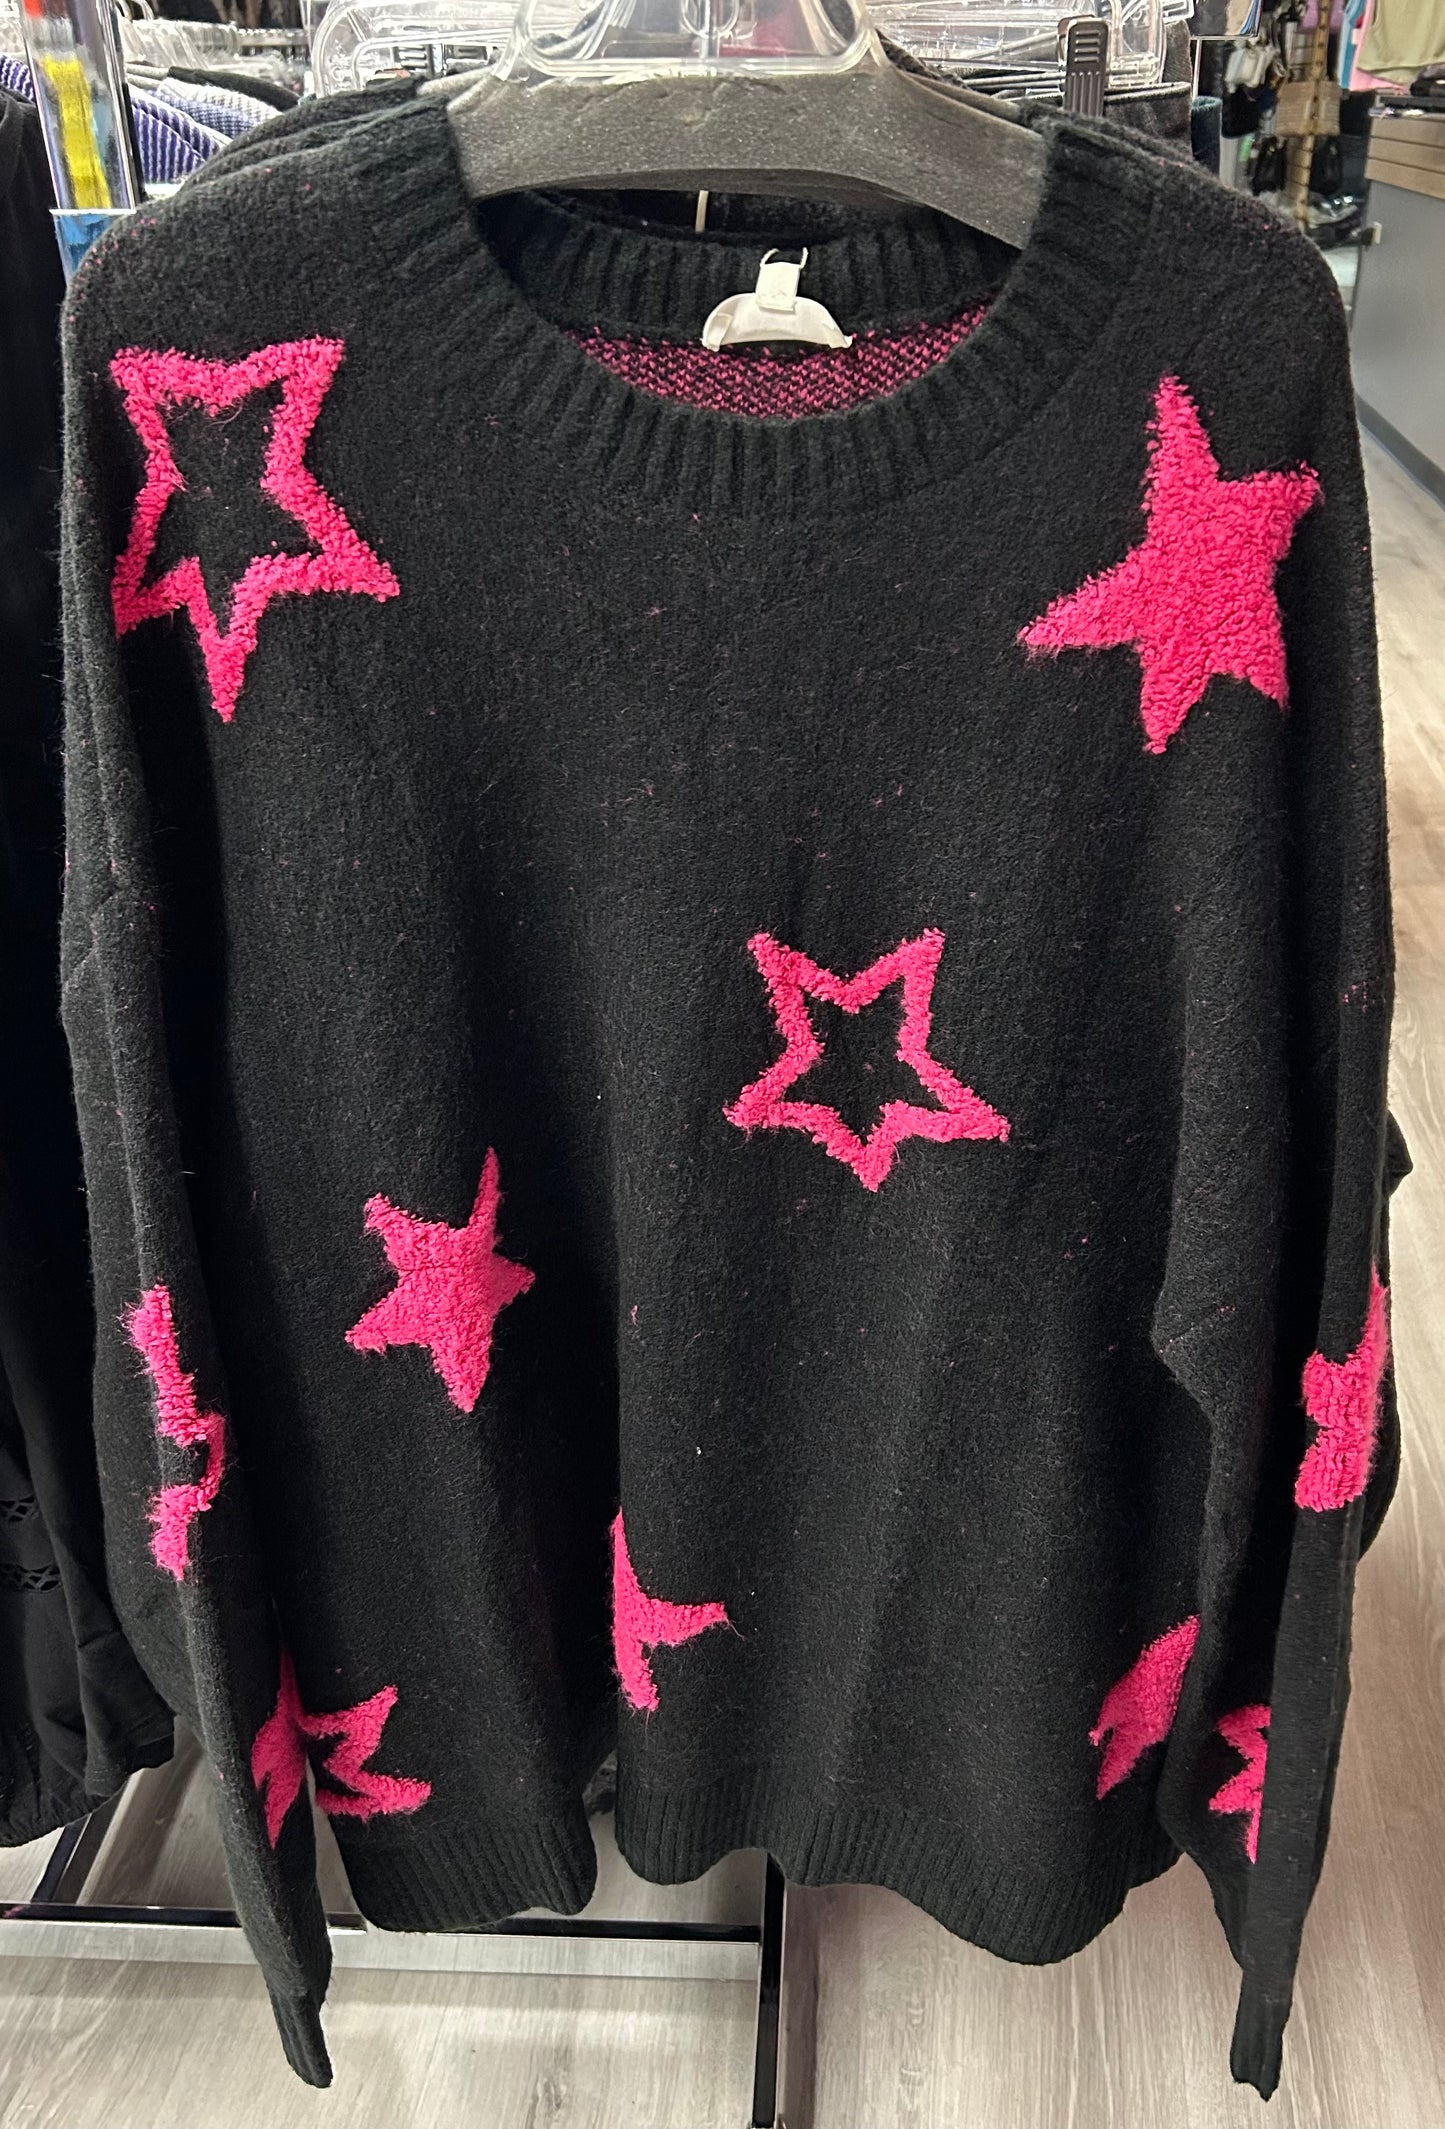 Plus size black sweater with pink stars